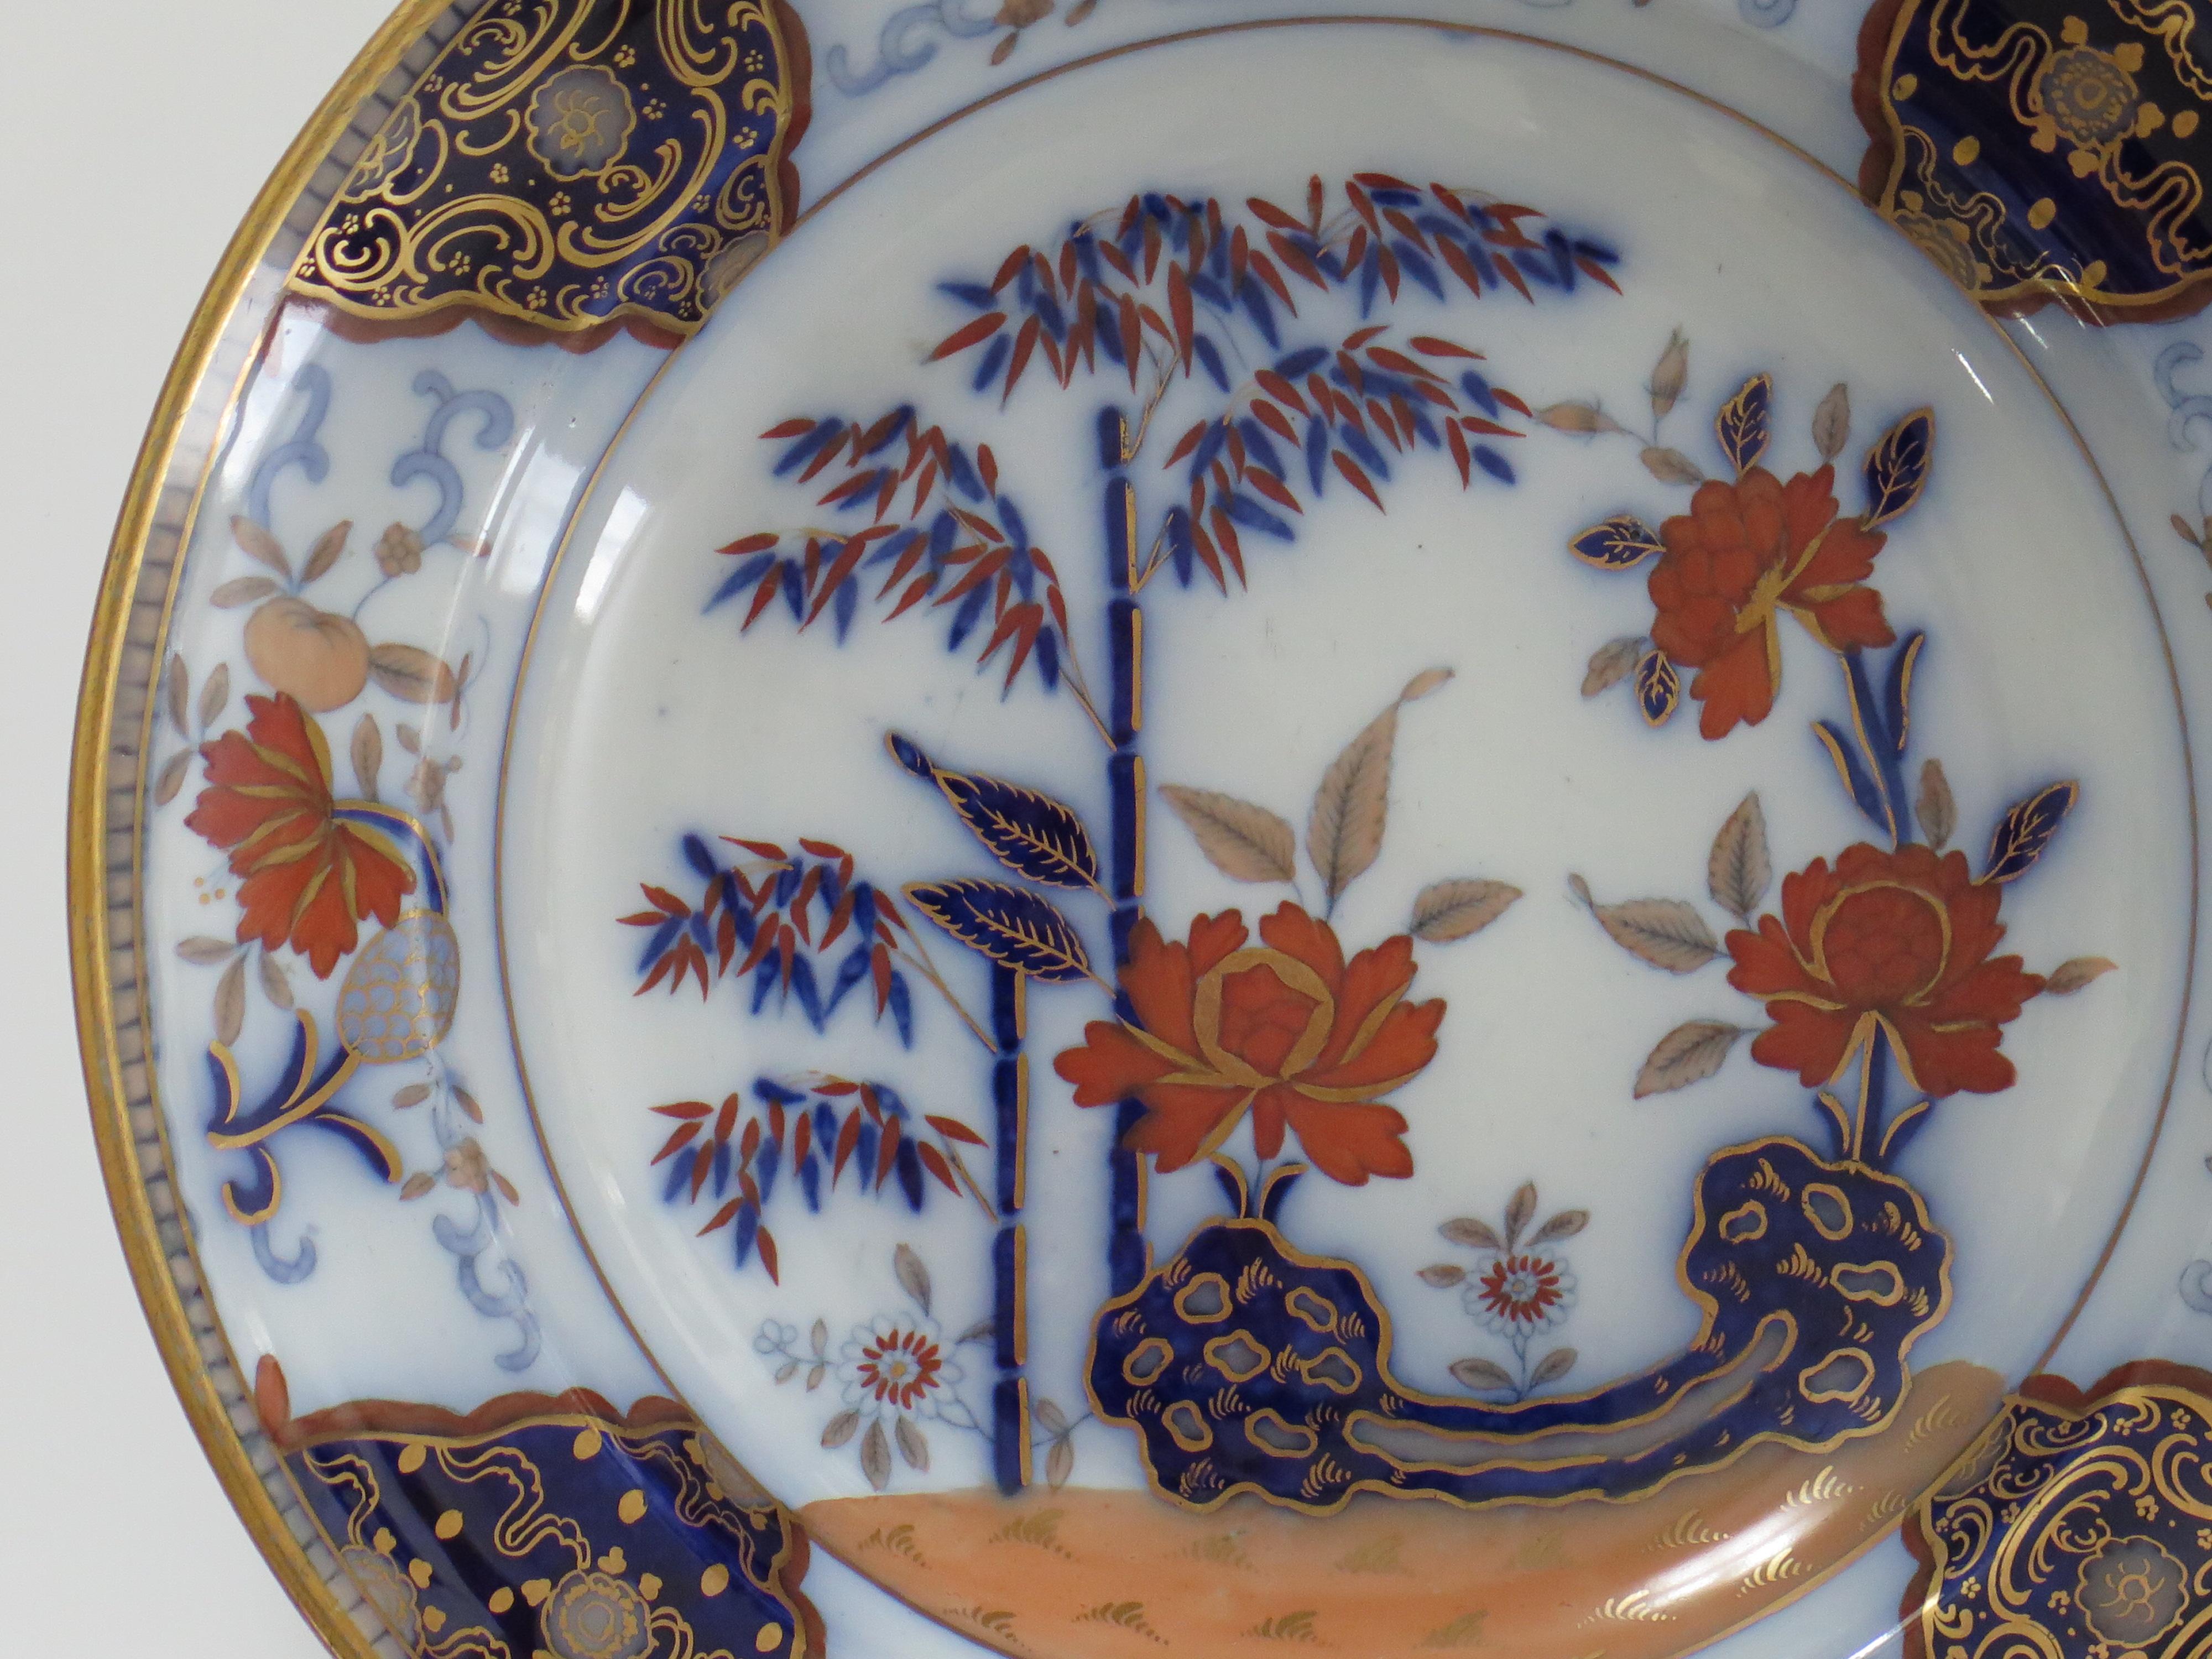 This is a very good, late Georgian, Set of SIX ironstone Soup Bowls or Plates, in pattern no. 135, manufactured by the English Davenport factory, which was situated in Longport, Staffordshire, England between 1794 and 1887.

These are well potted,